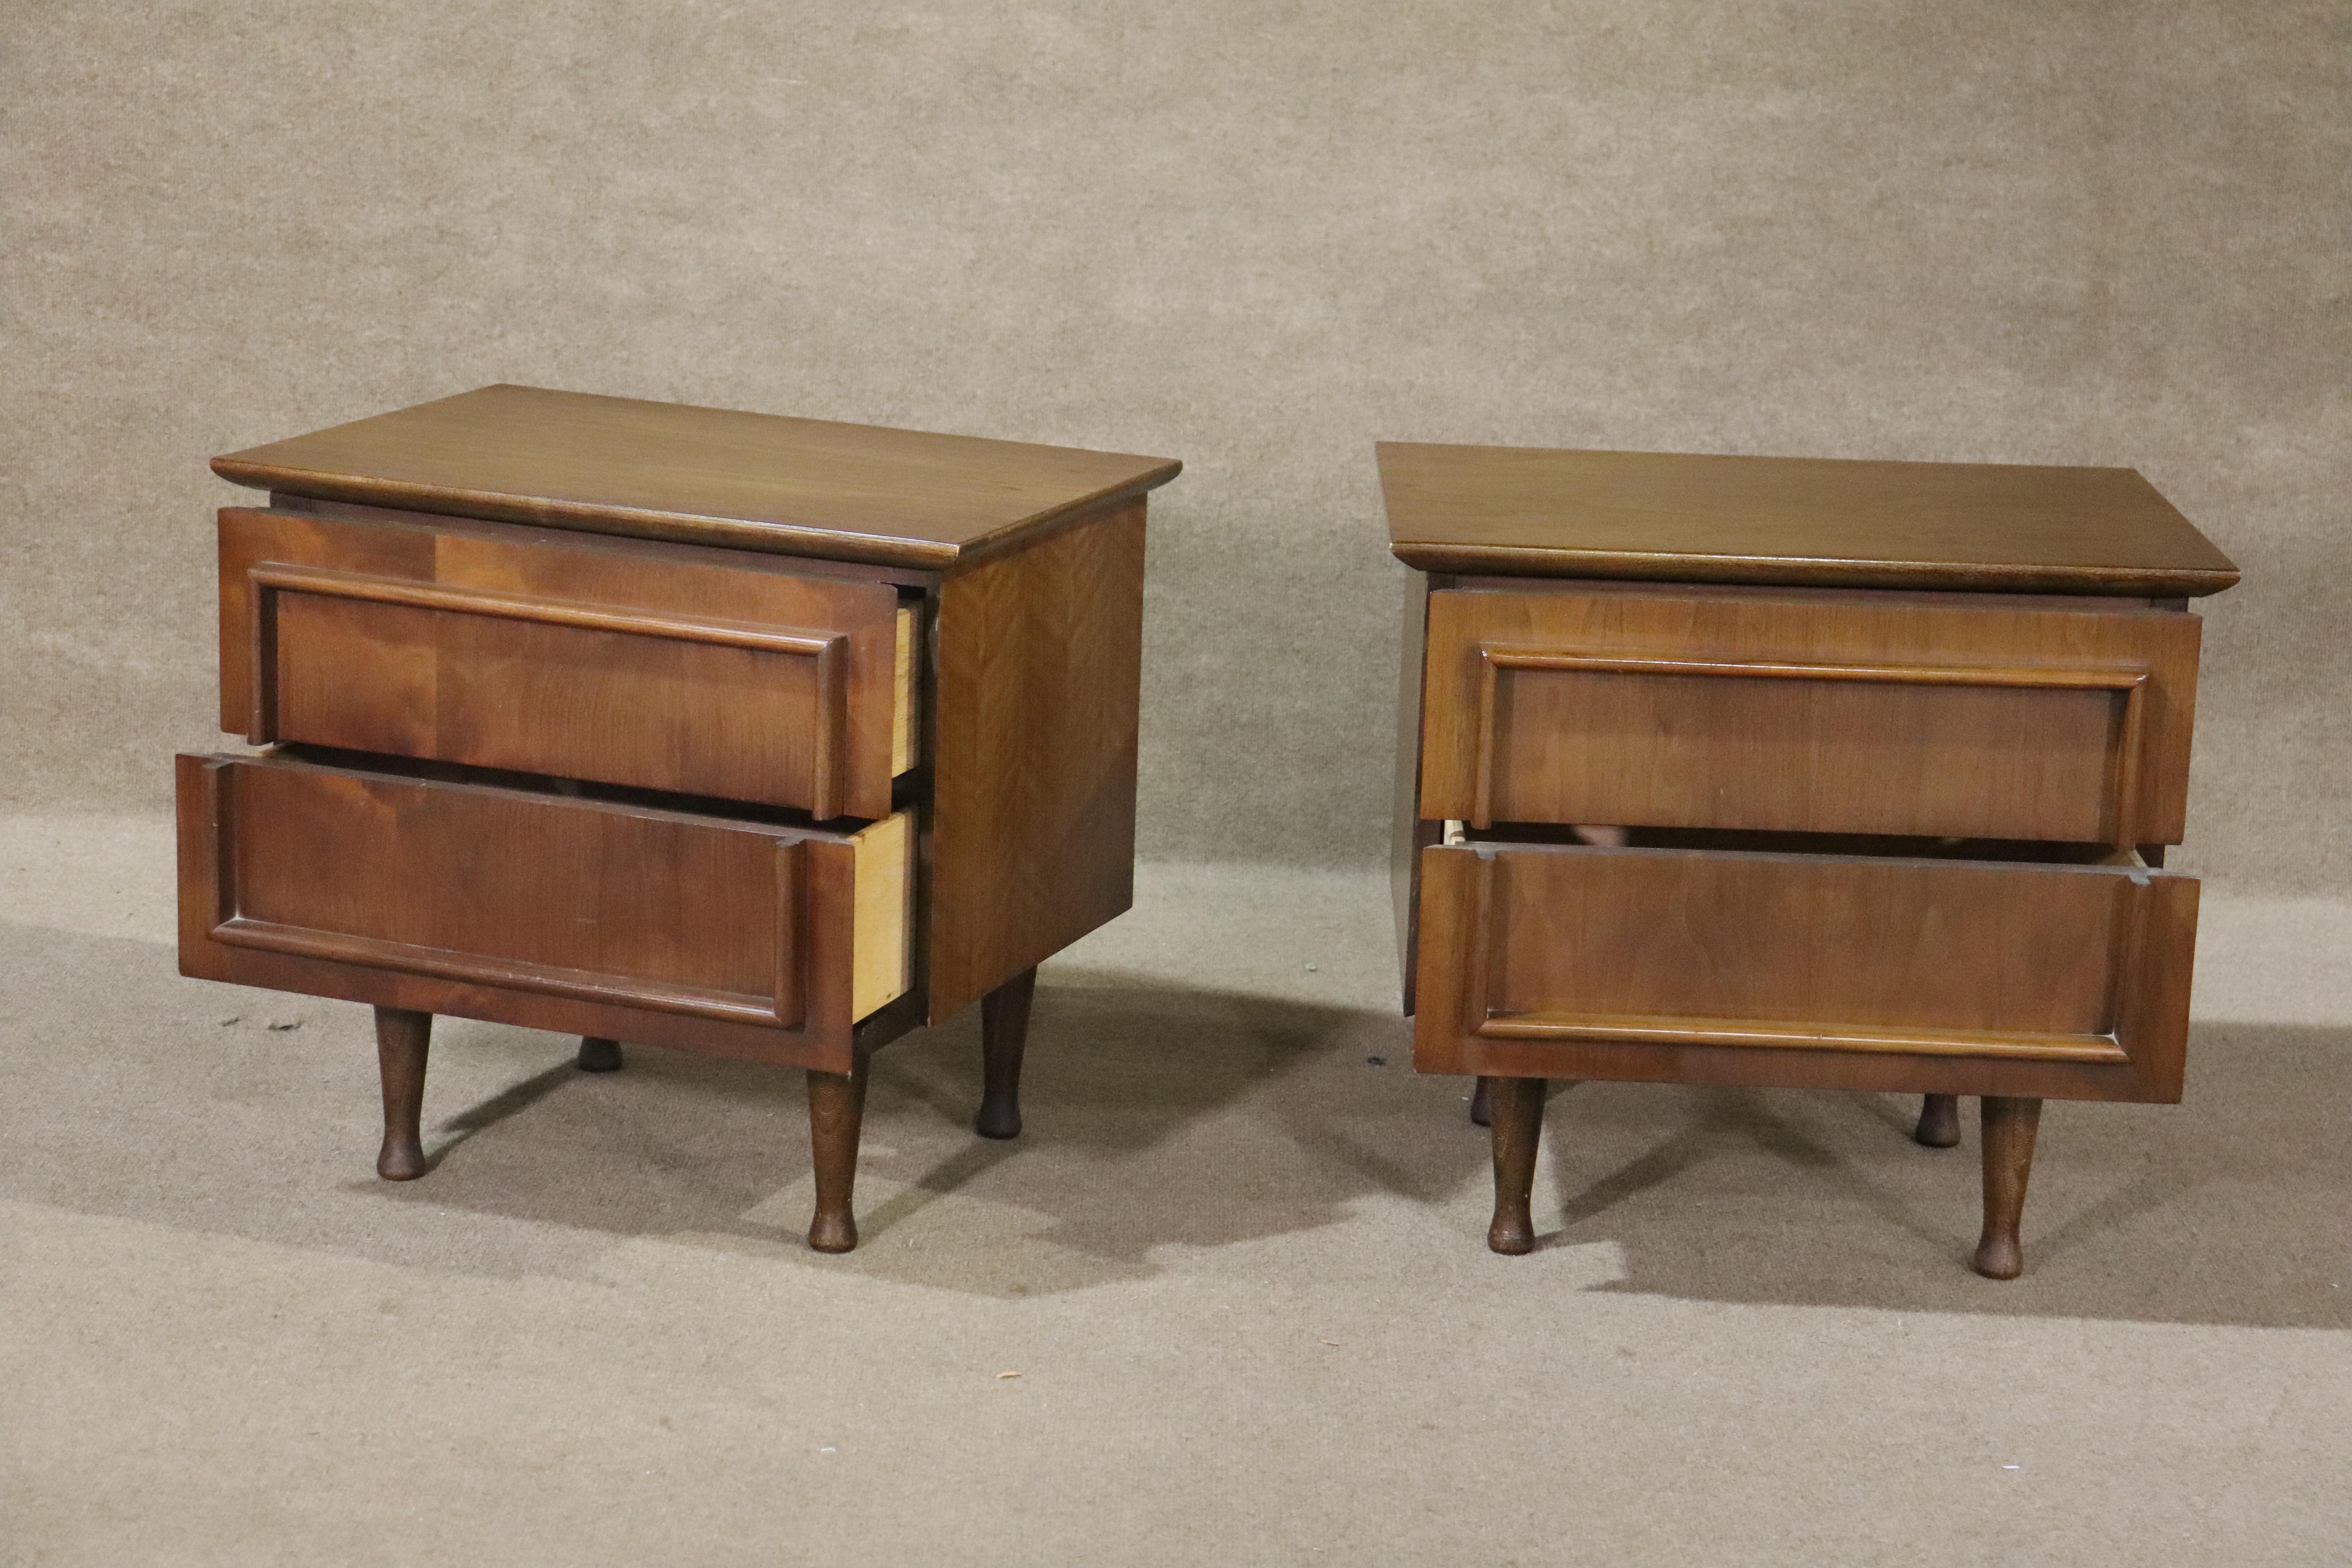 Pair of mid-century modern end tables by American of Martinsville. All walnut grain with two drawers.
Please confirm location NY or NJ